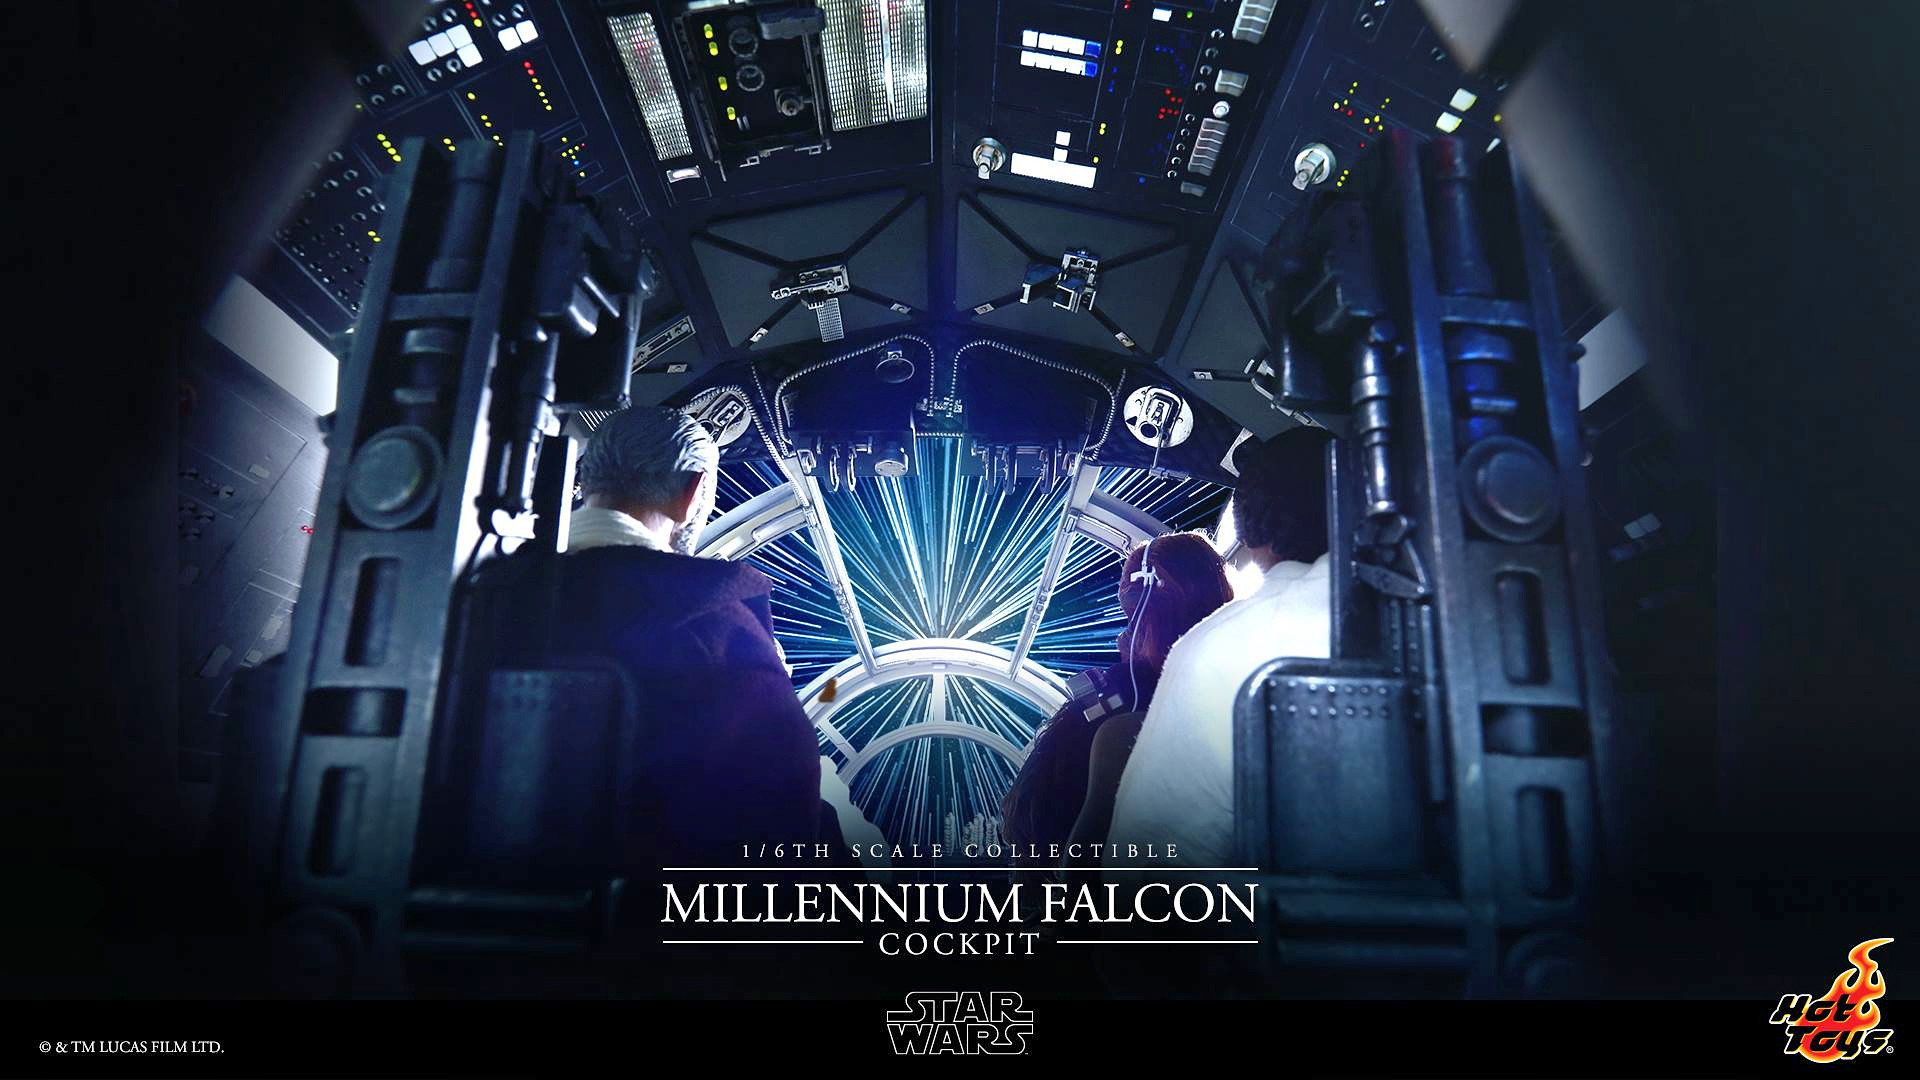 STAR WARS: THE FORCE AWAKENS Millennium Falcon Images Worthy 1600Ã1119 Millenium  Falcon Backgrounds